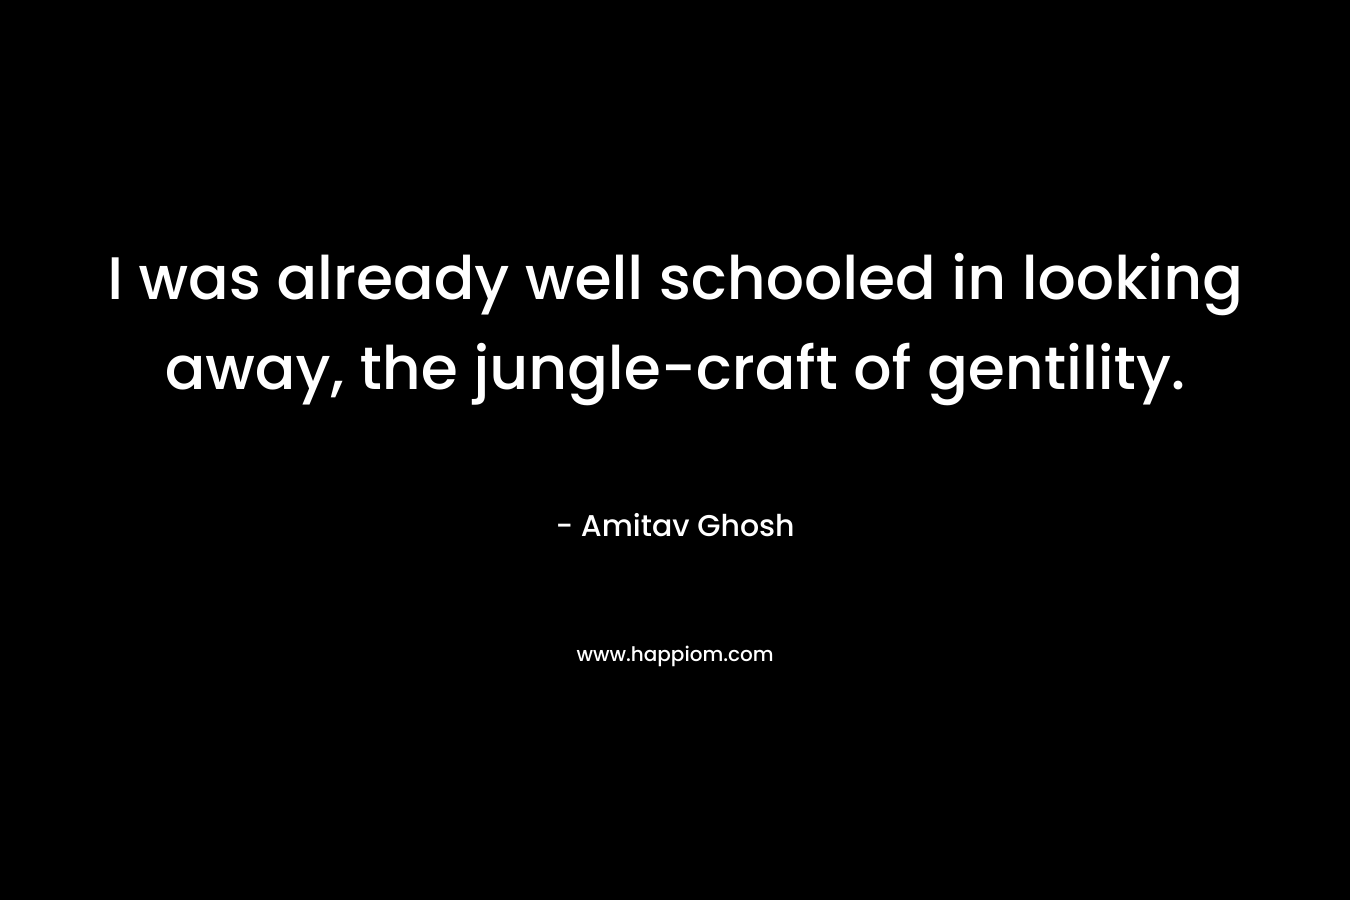 I was already well schooled in looking away, the jungle-craft of gentility.